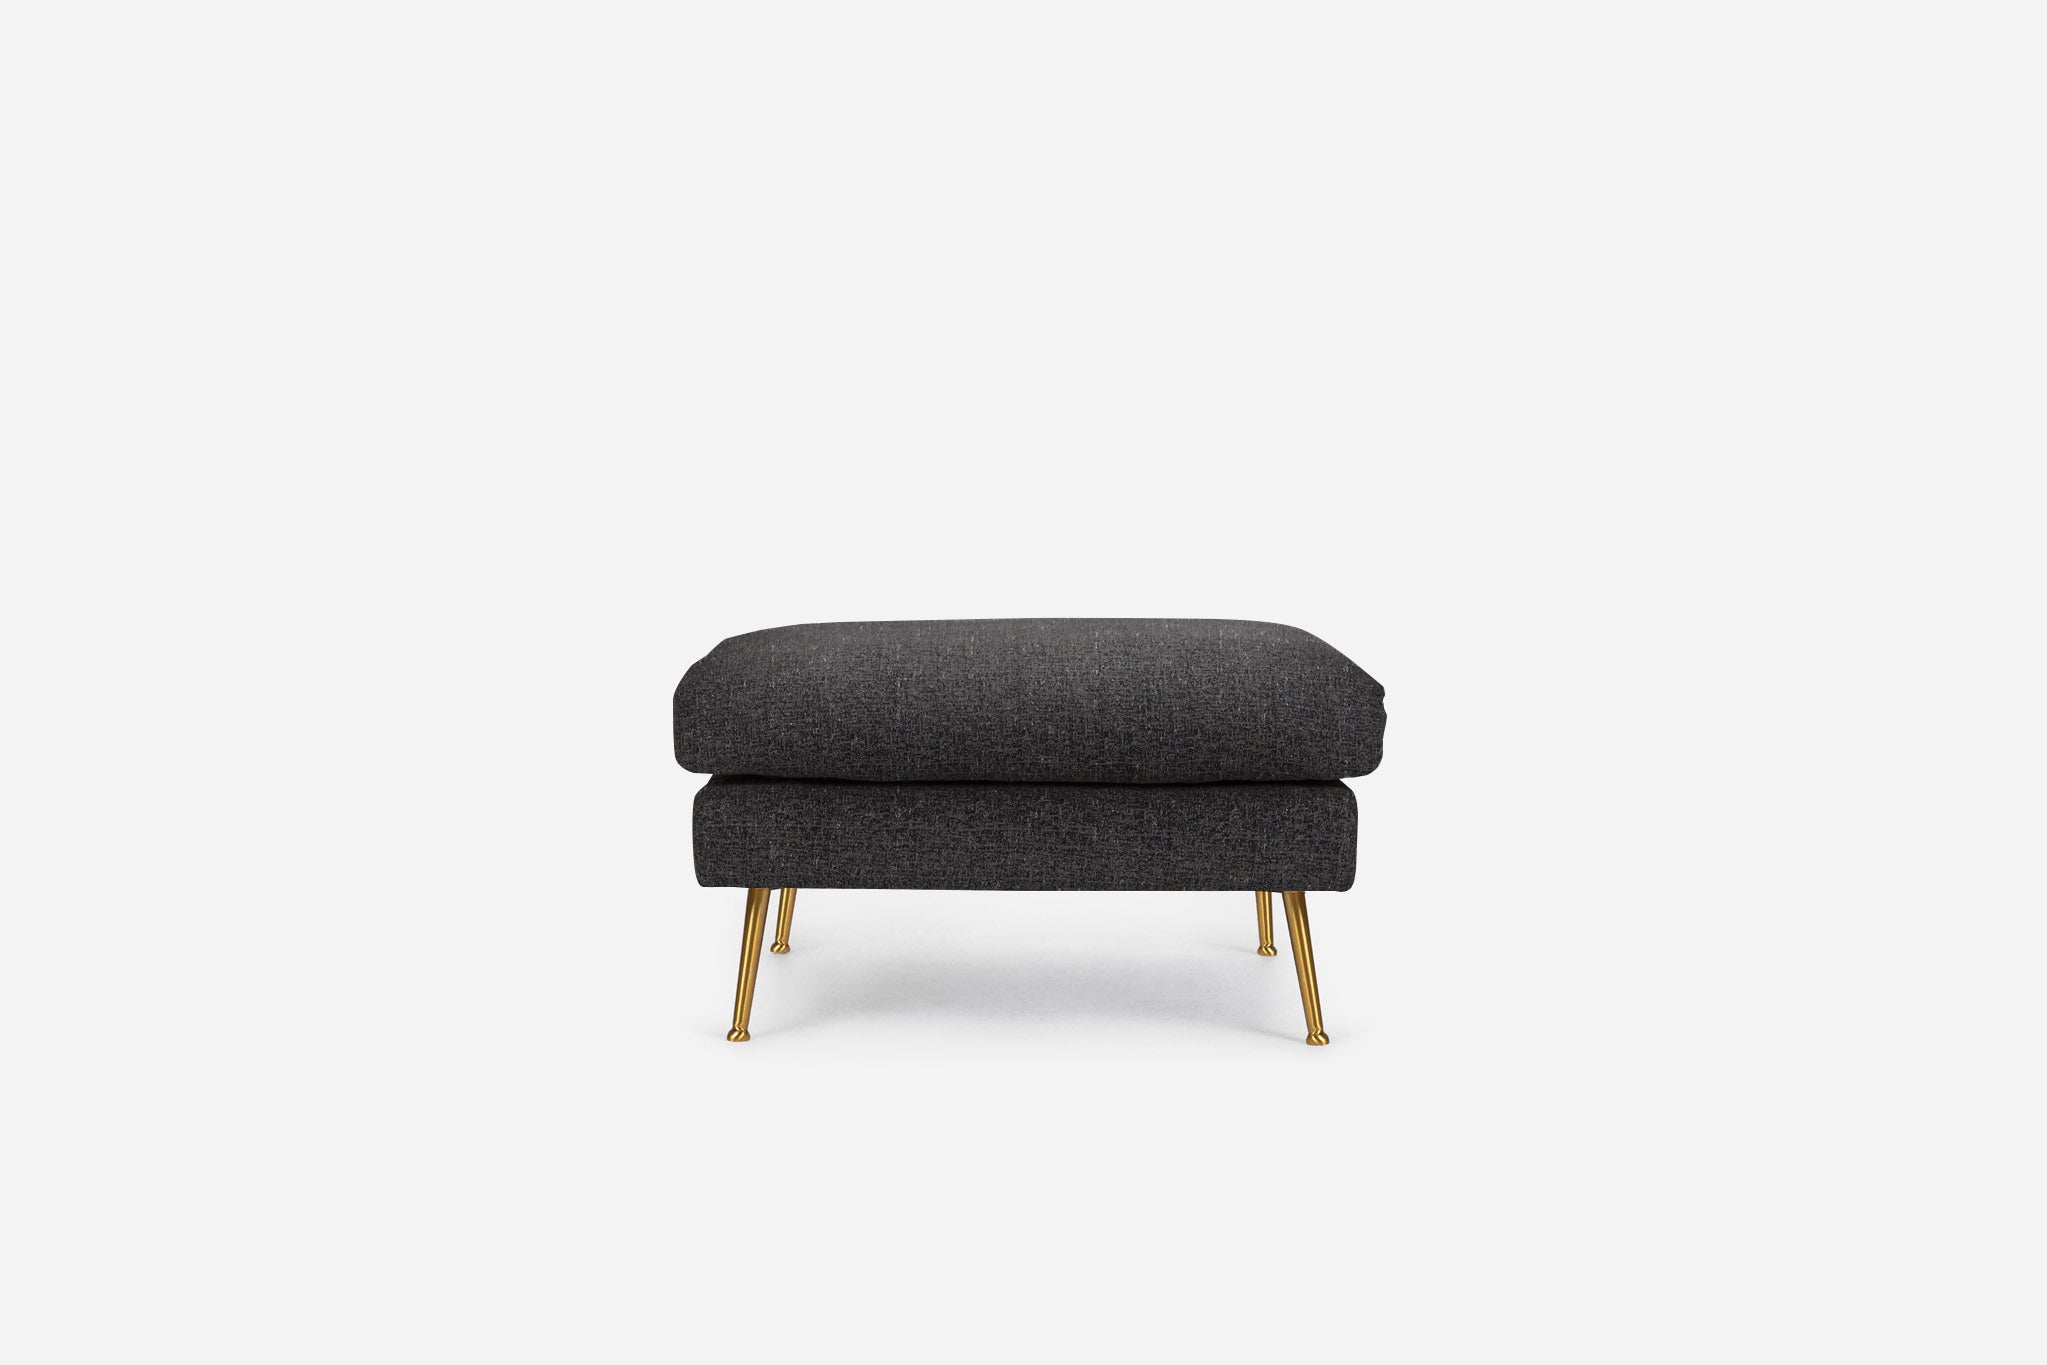 park ottoman shown in charcoal with gold legs